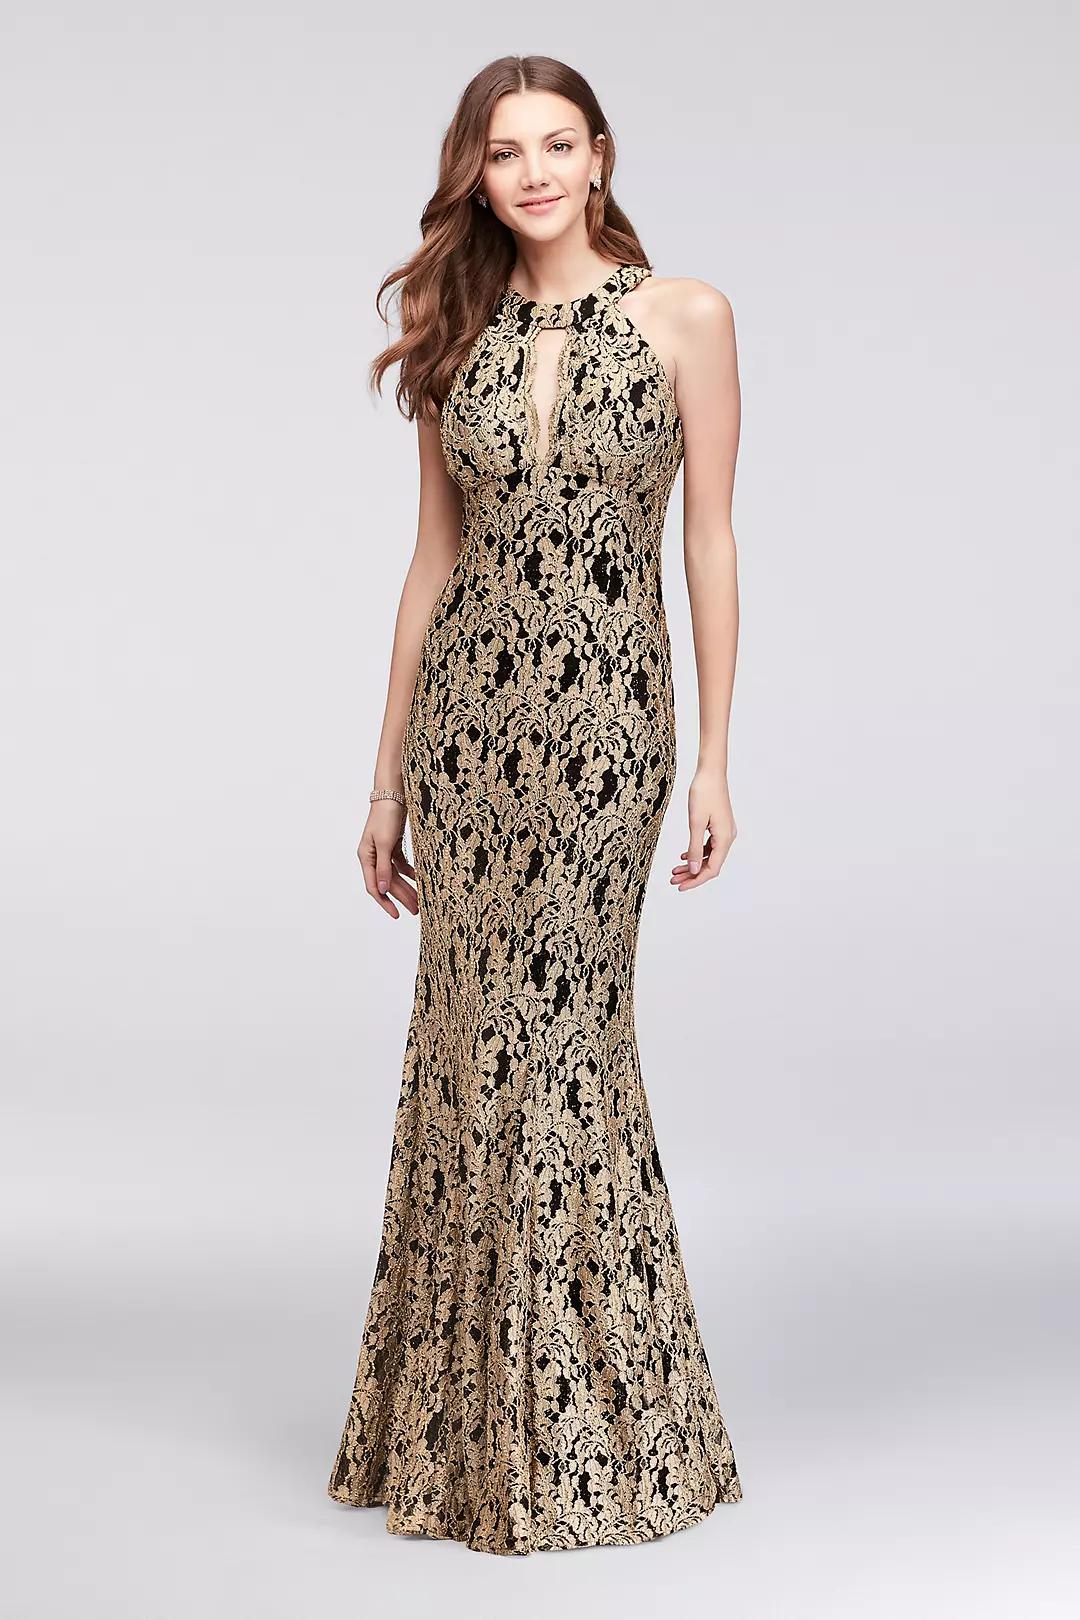 Gold Lace High-Neck Halter Mermaid Gown Image